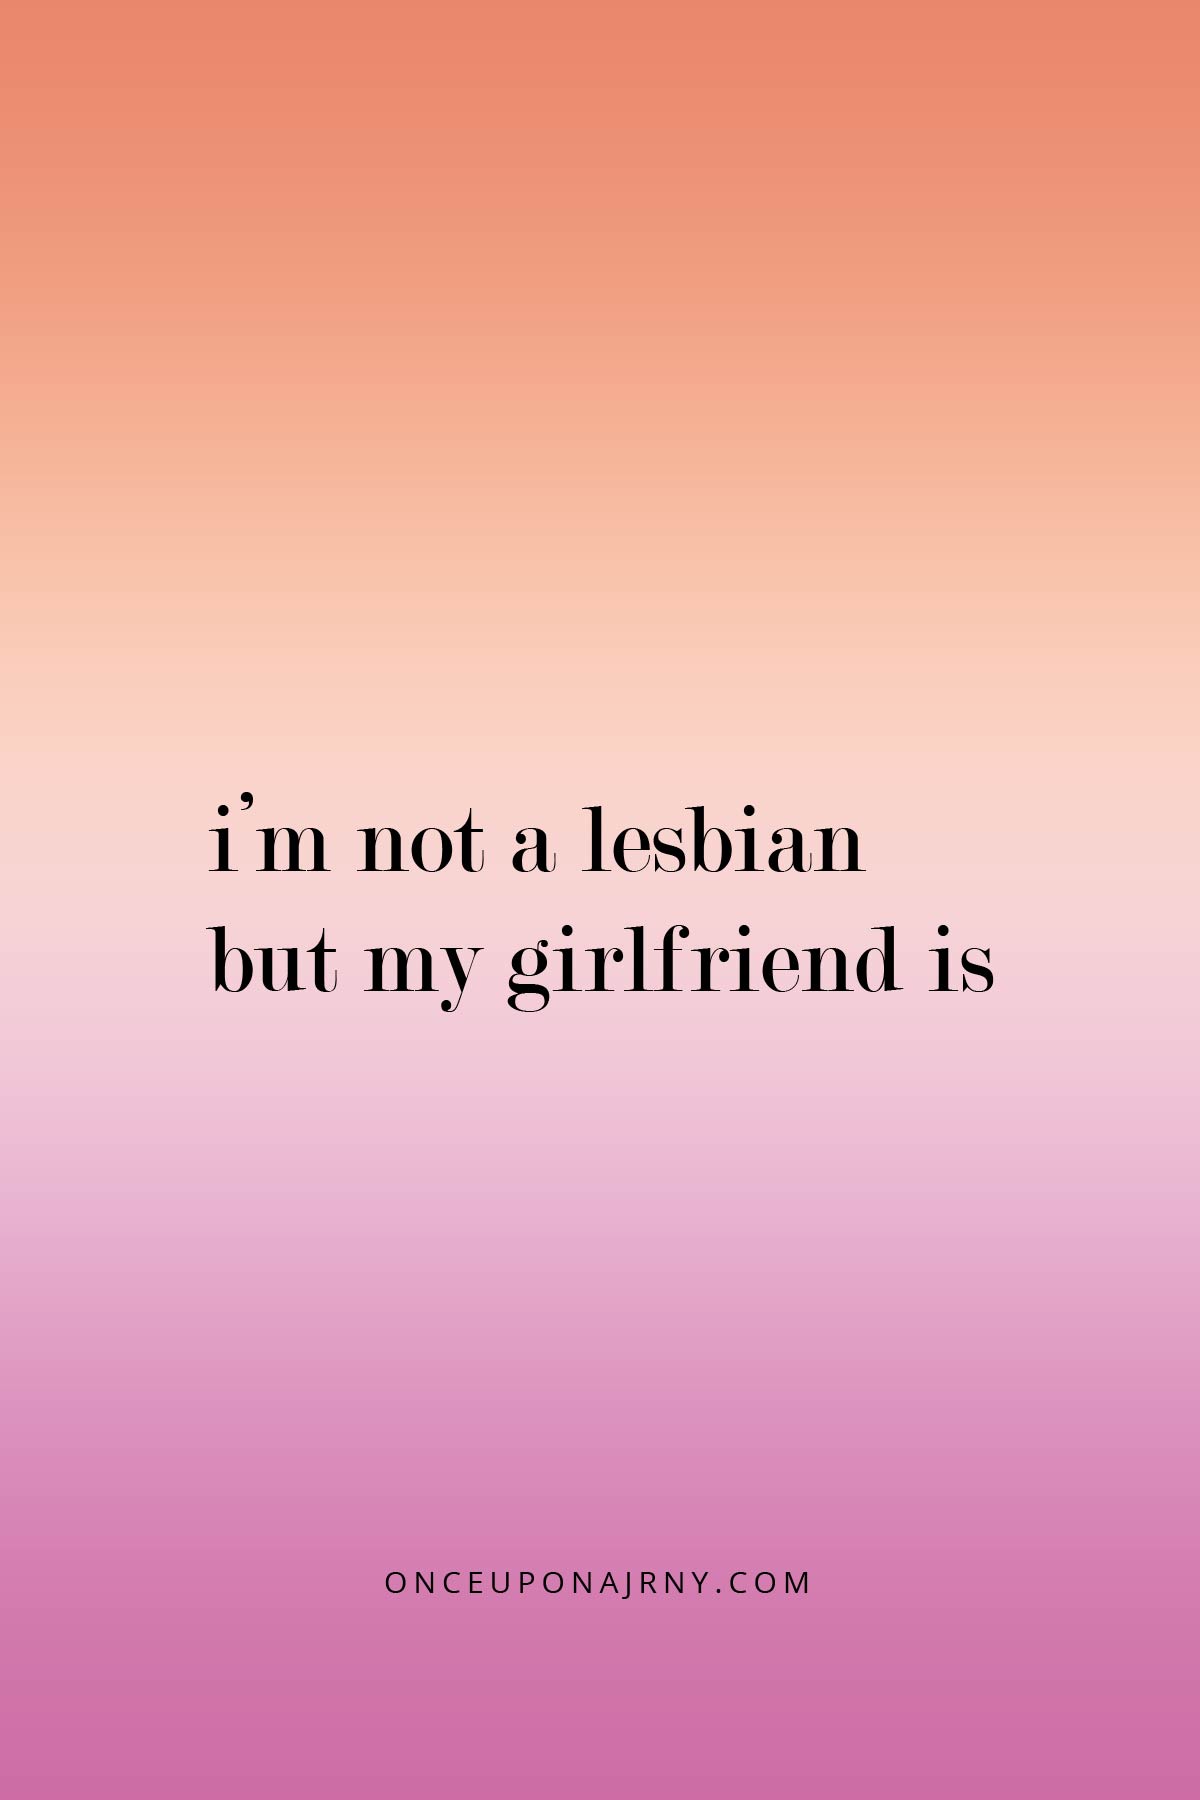 brent howatt share cute lesbian quotes for your girlfriend photos